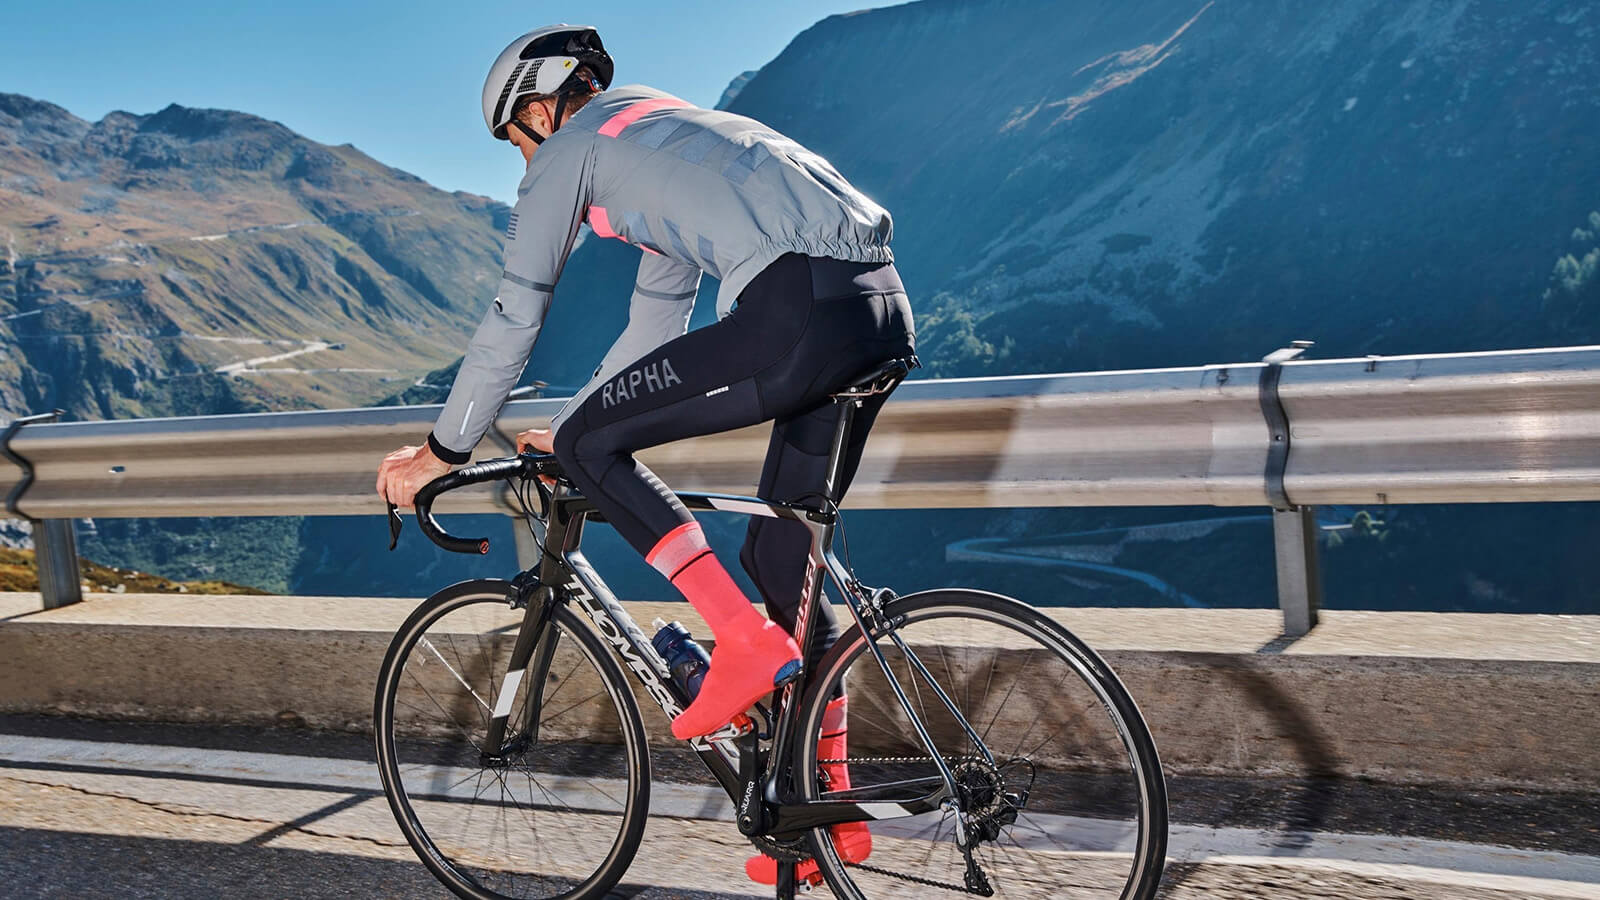 Rapha Gets on the Fast Track with EFI Optitex 3D